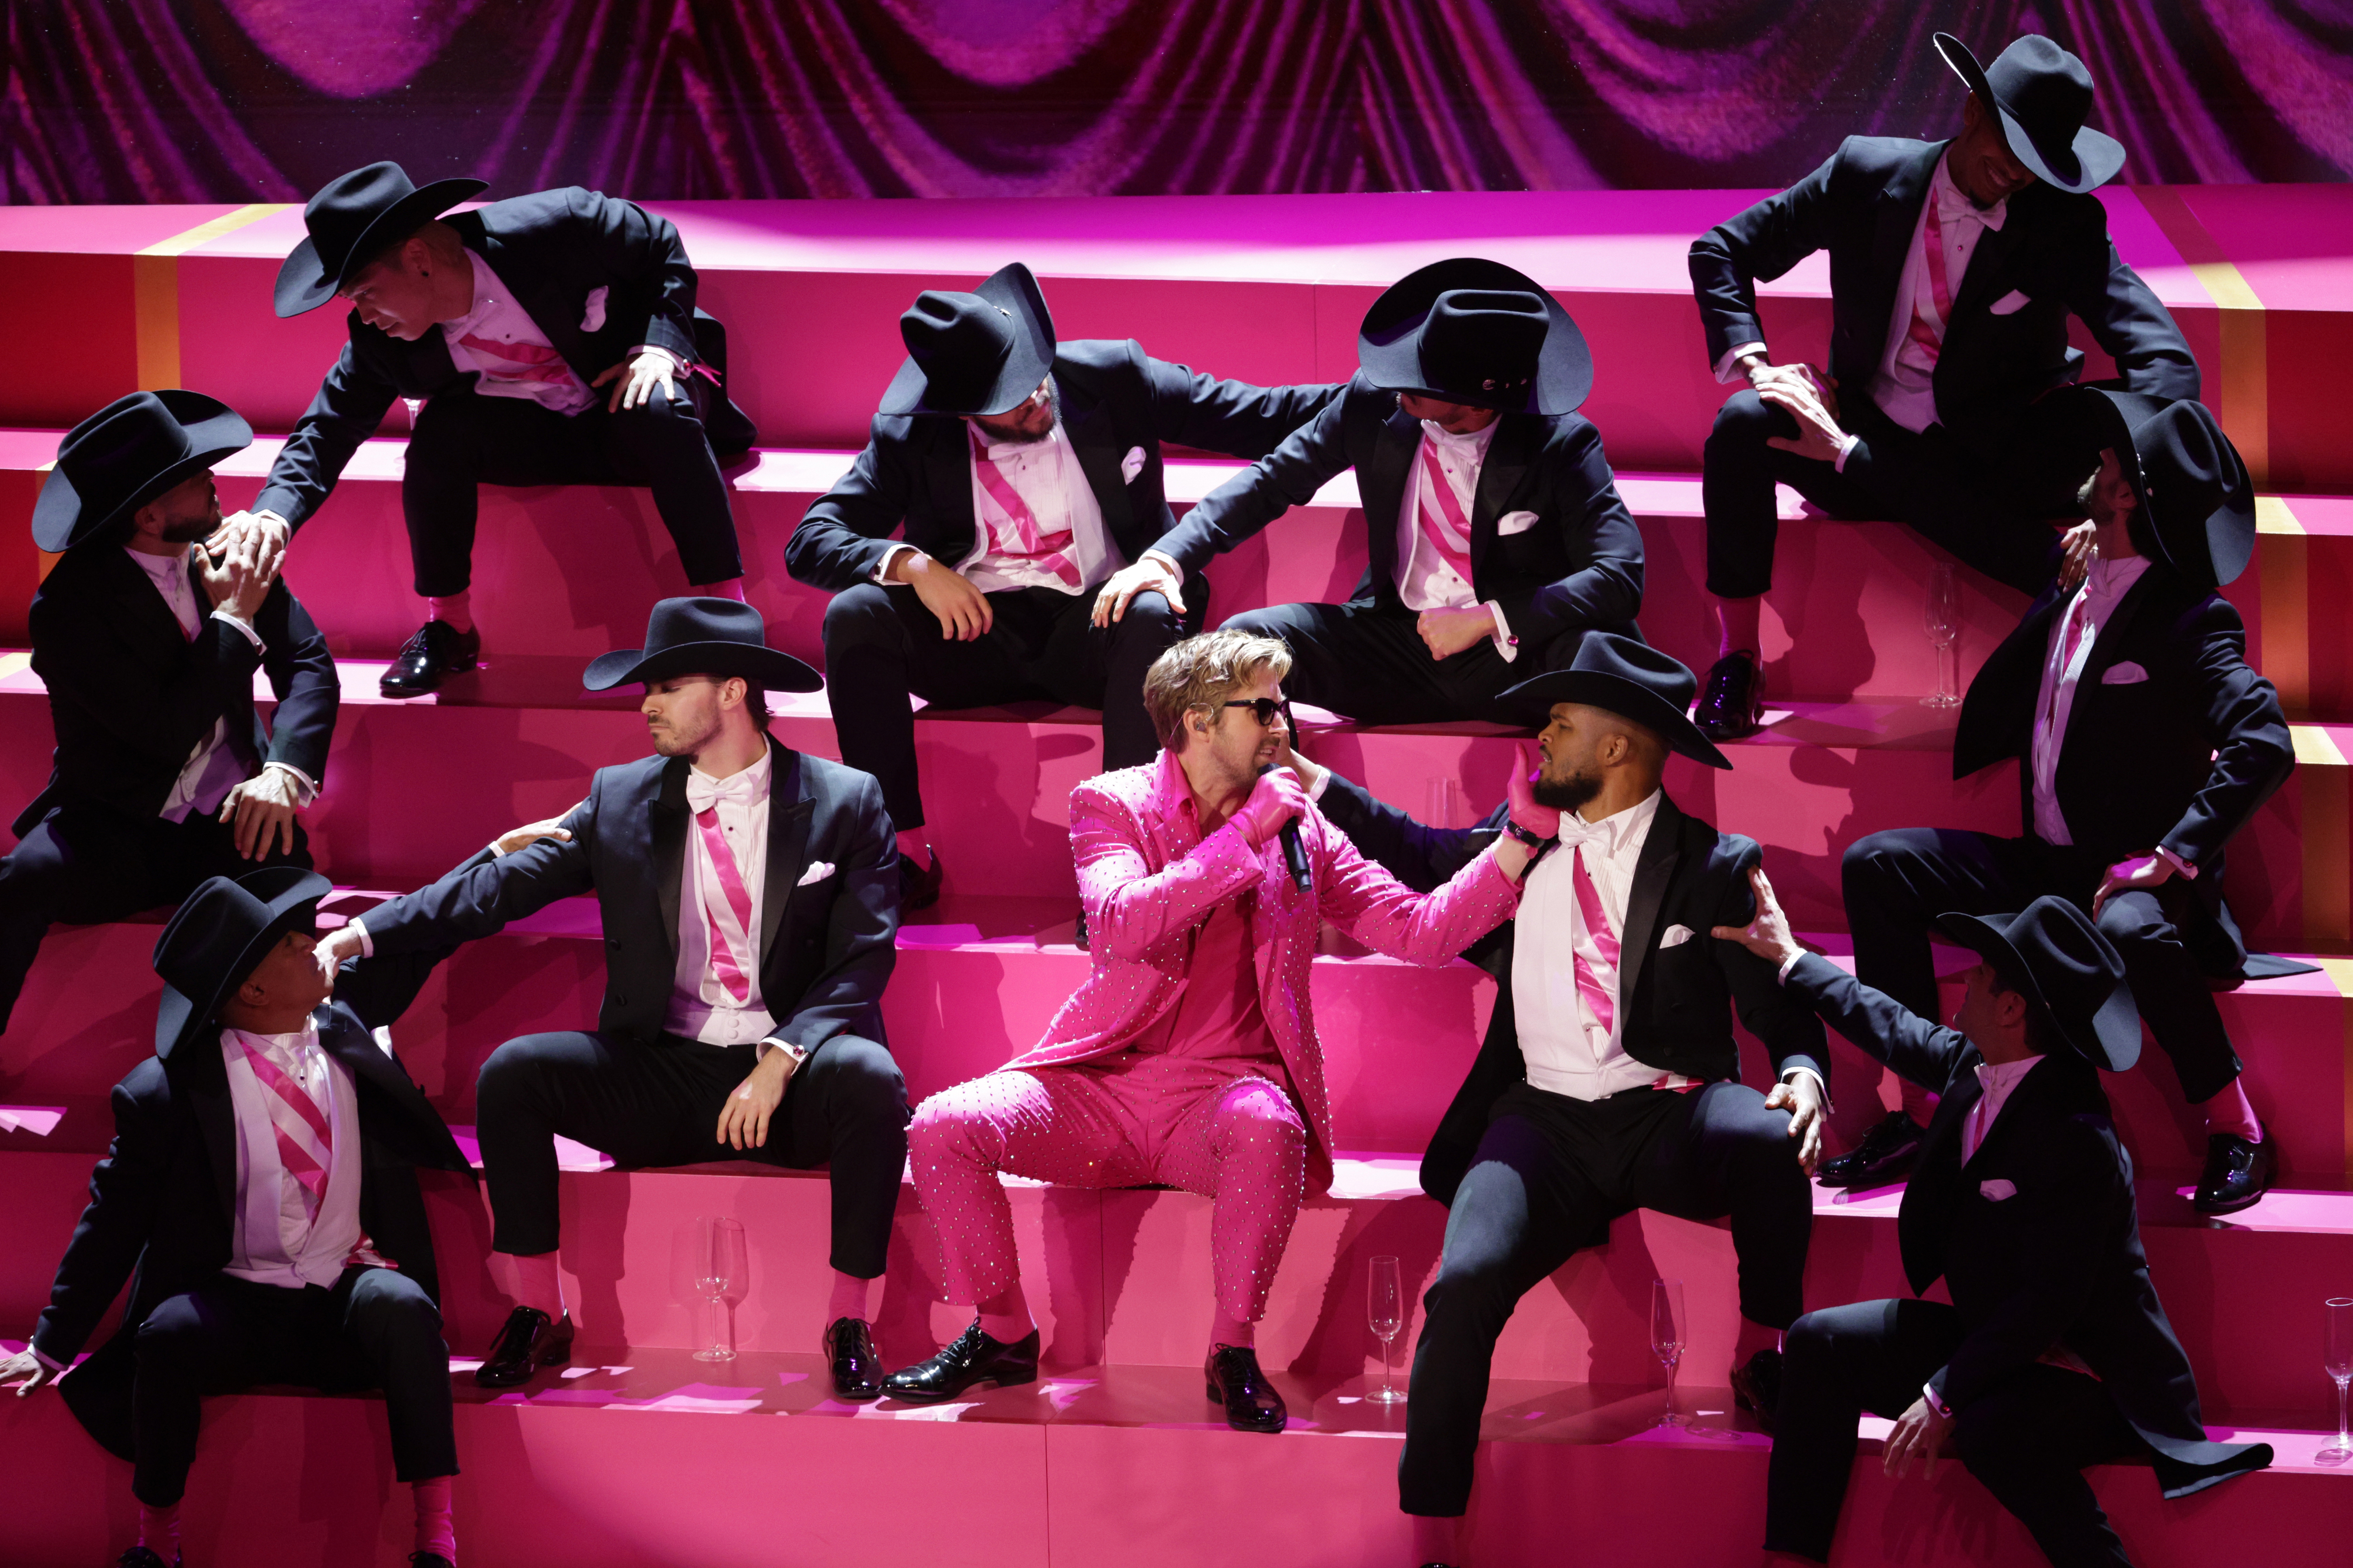 Ryan in a pink suit at the center holding a microphone, with other performers in pink and black attire sitting on steps onstage